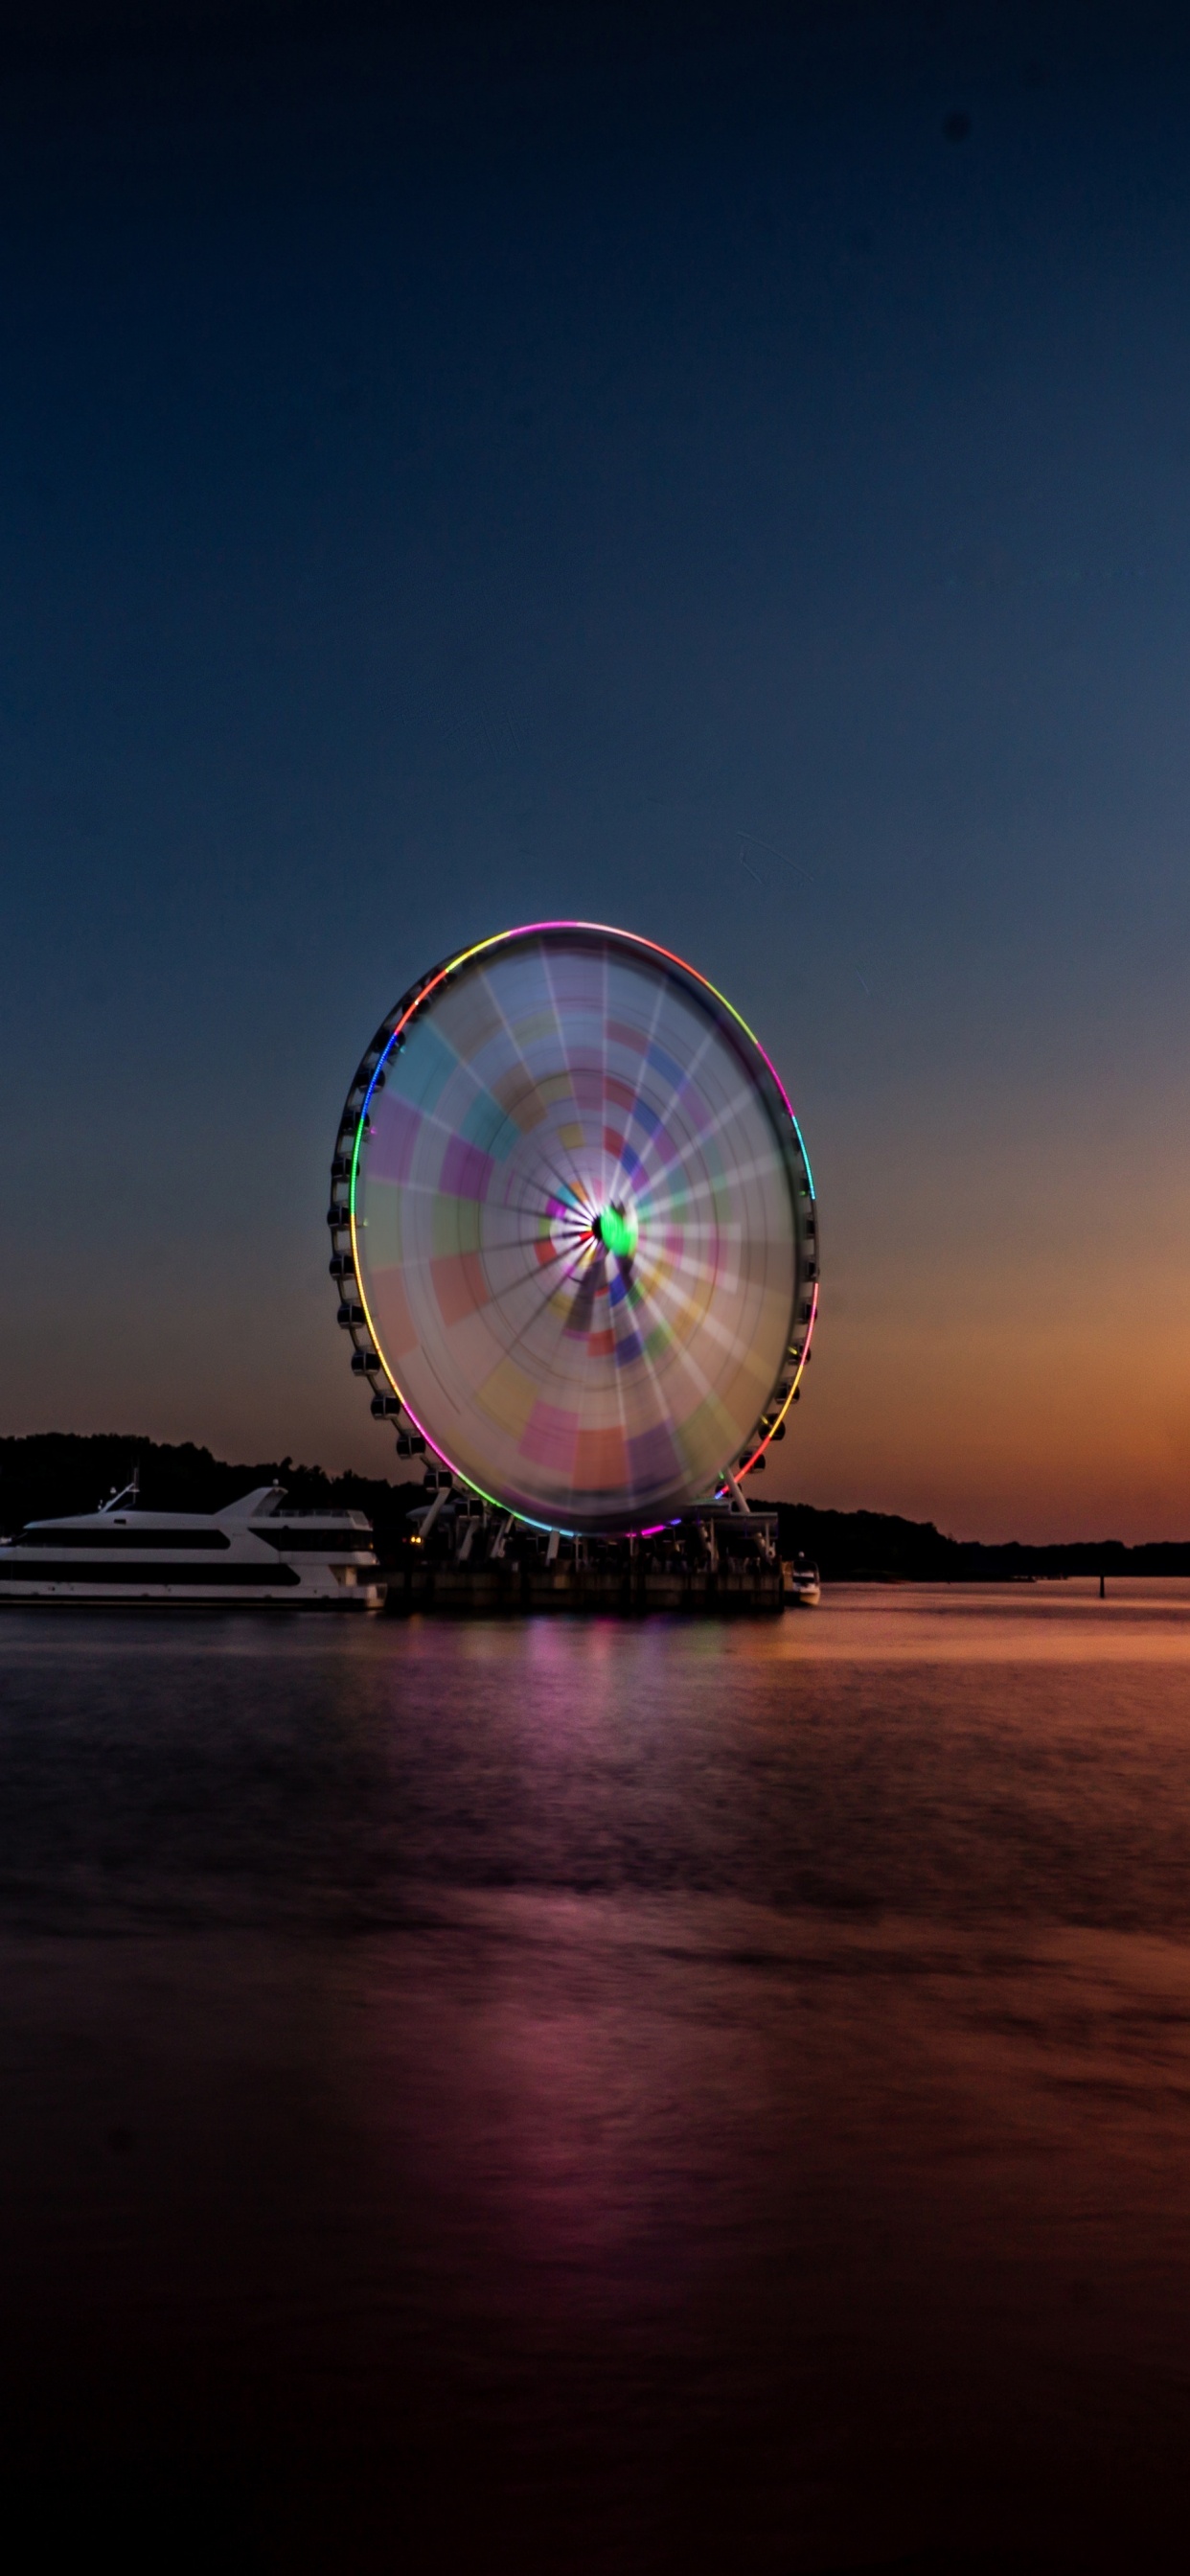 Ferris Wheel Near Body of Water During Night Time. Wallpaper in 1242x2688 Resolution